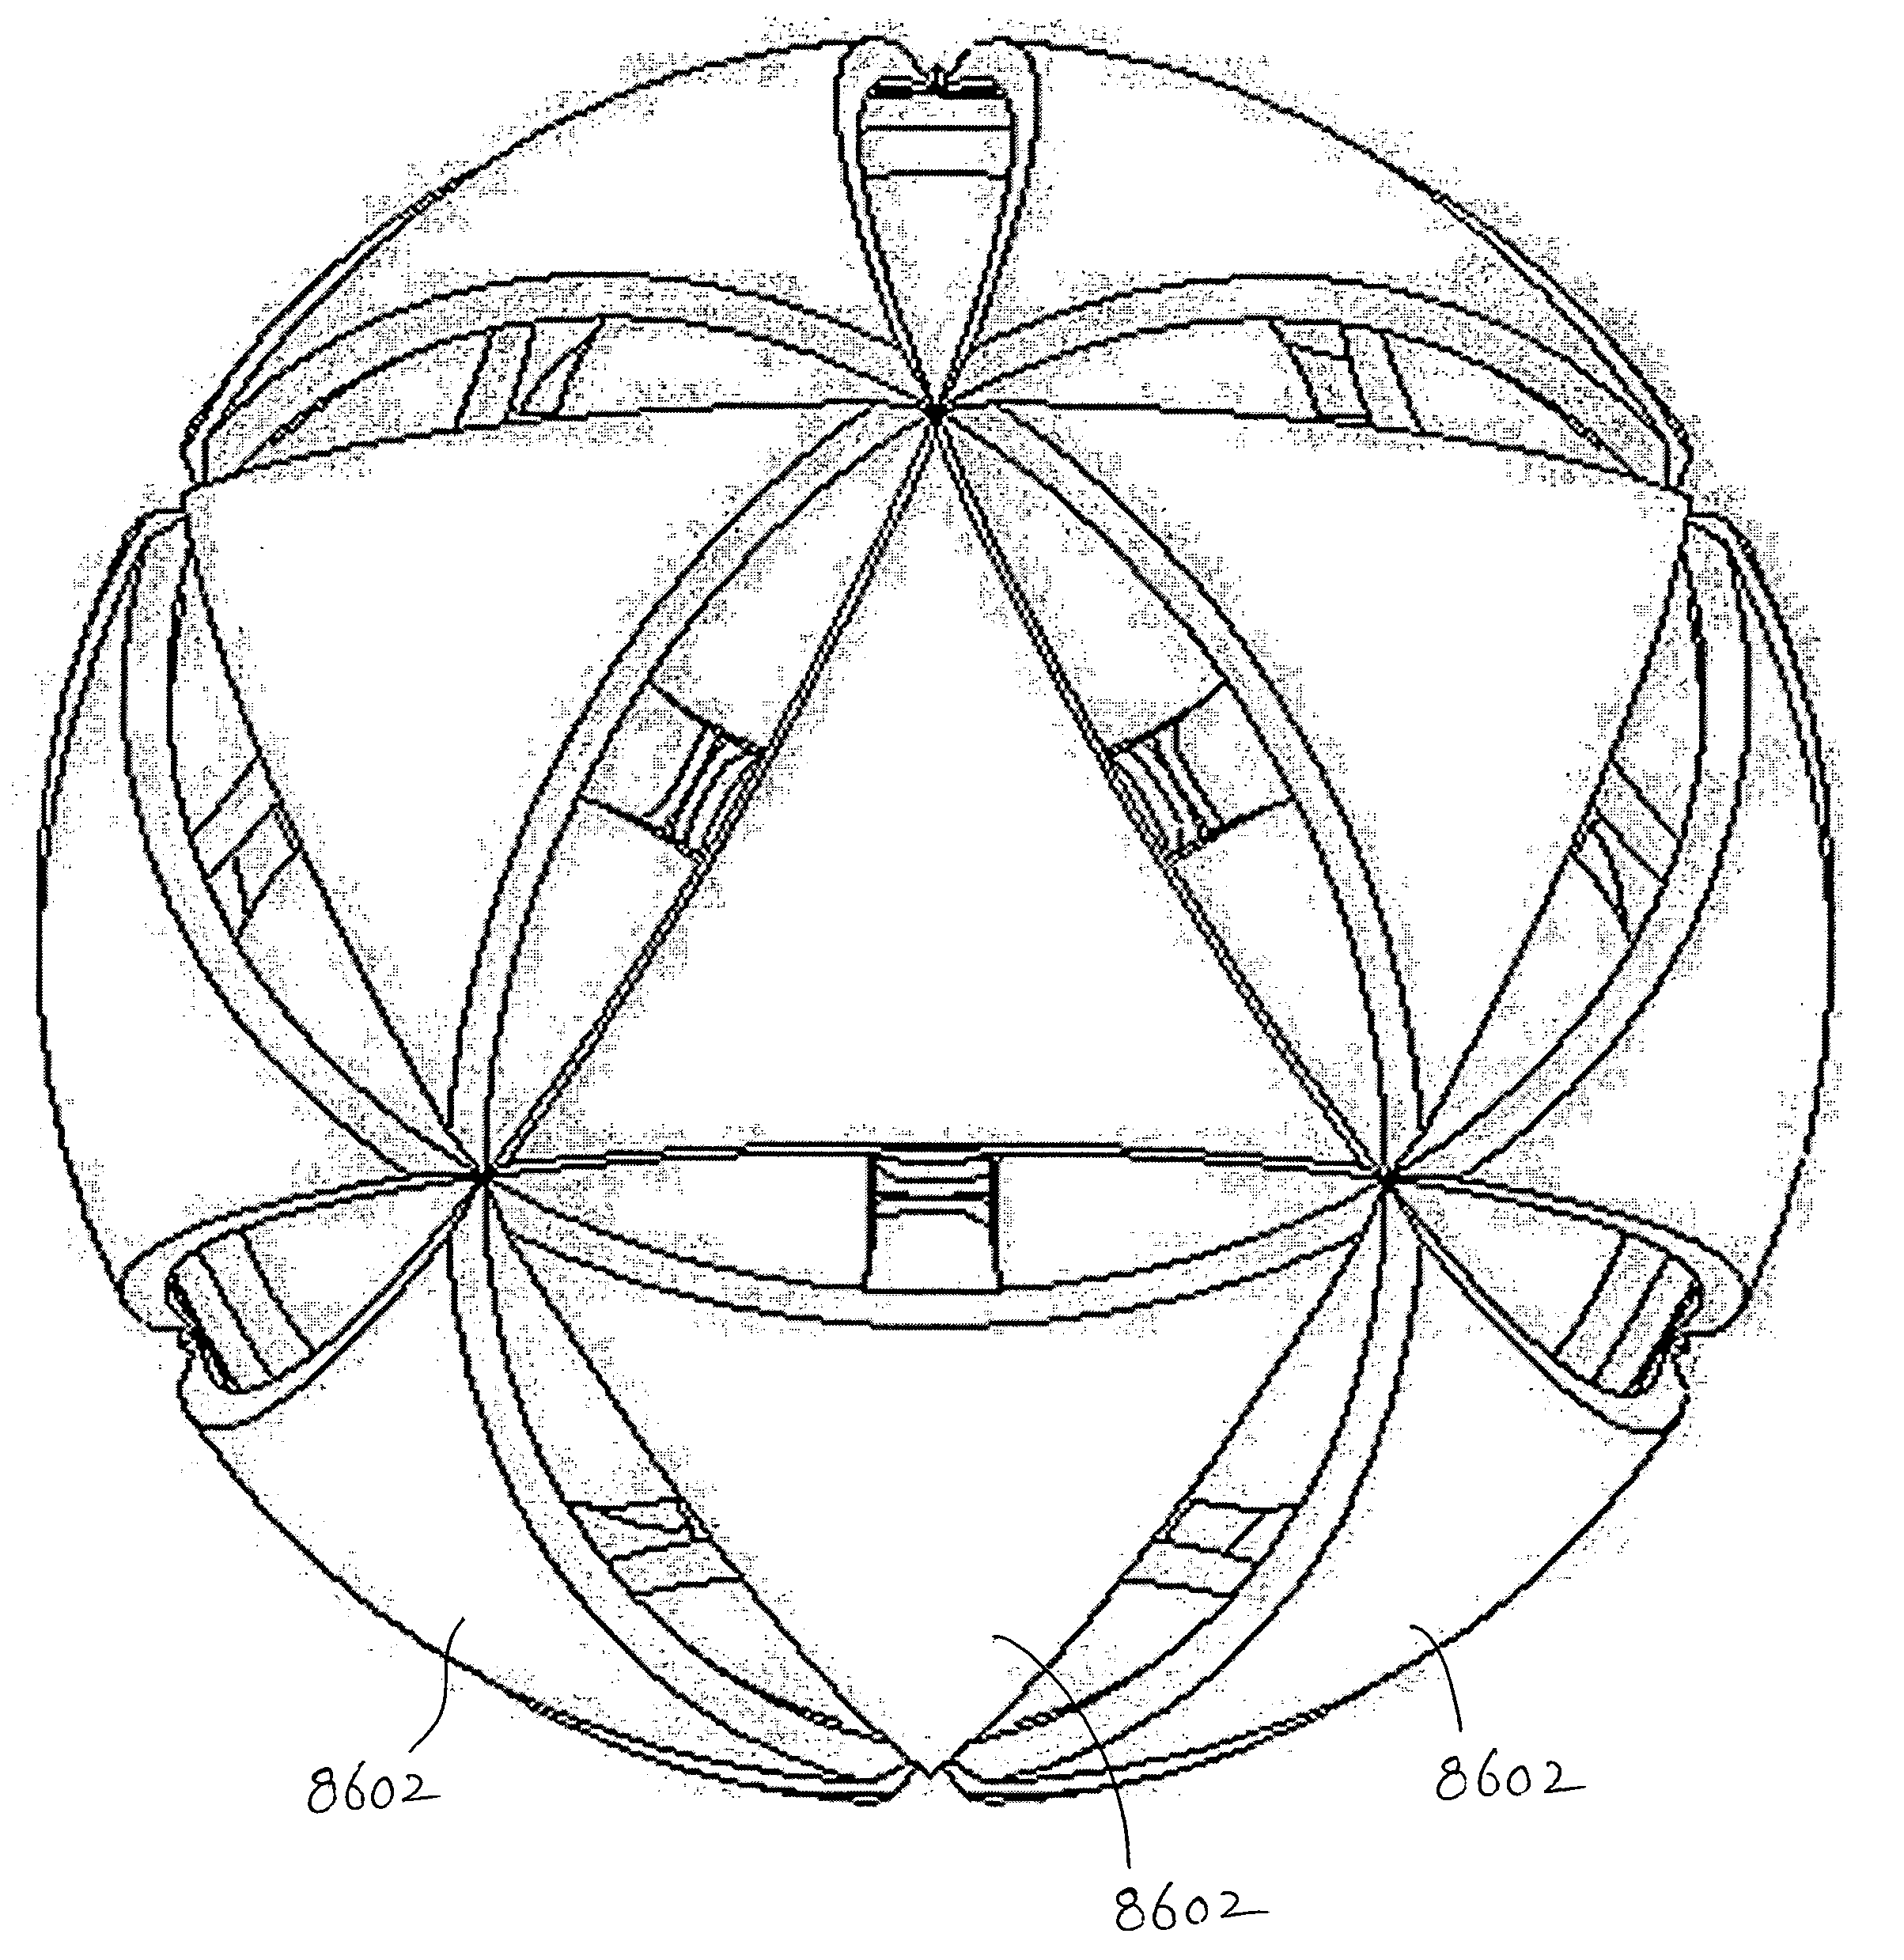 3-Dimensional puzzle and method of forming same